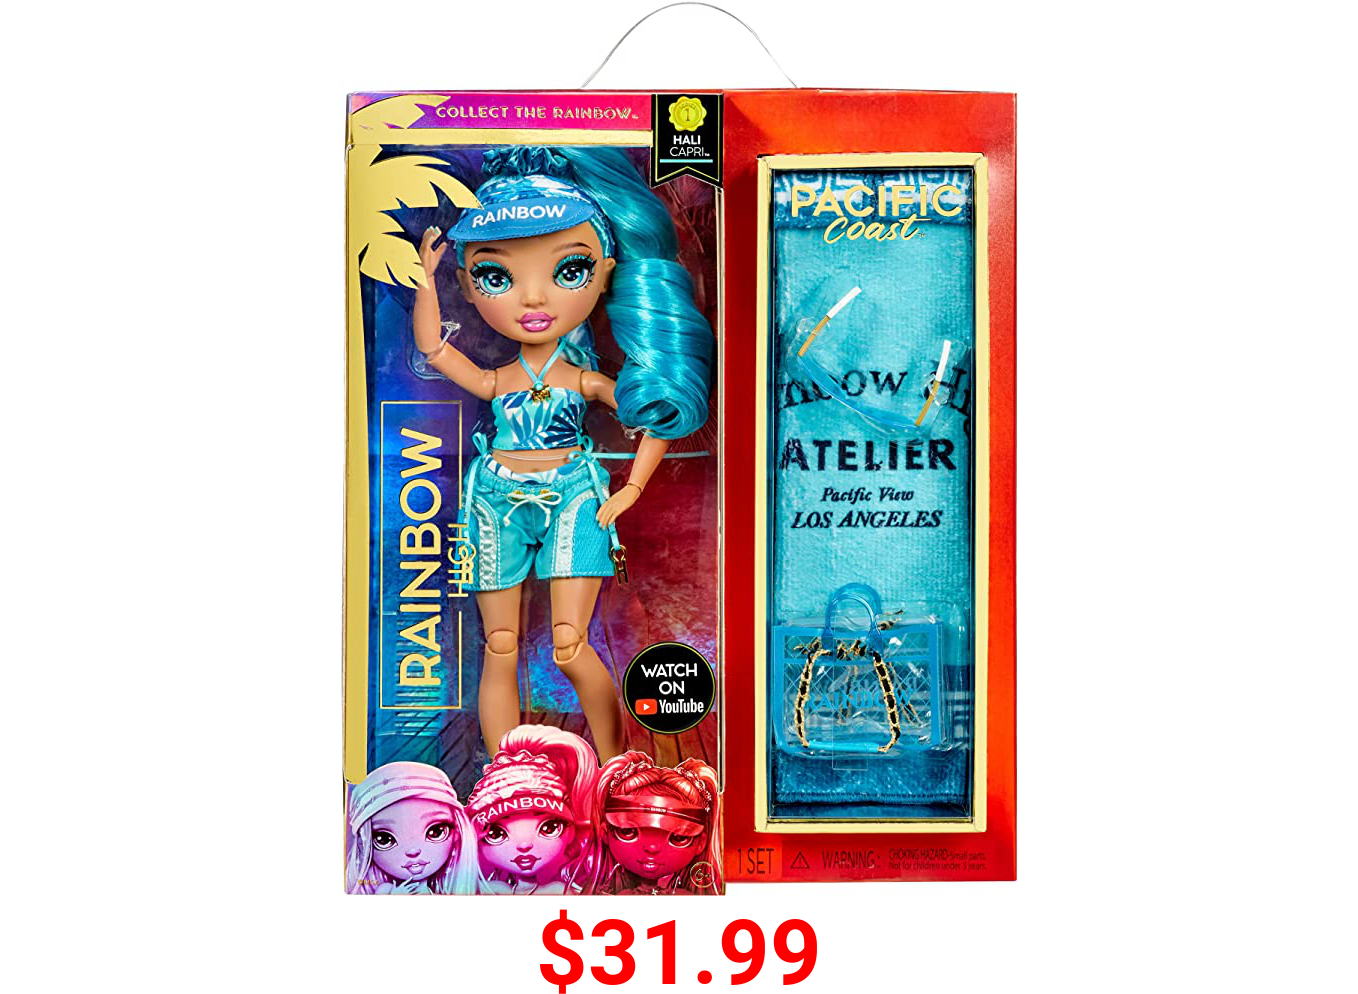 Rainbow High Pacific Coast Hali Capri (Blue) Fashion Doll with Pool Accessories playset, and Interchangeable Legs Feature. Great Gift for Kids 6-12 Years Old.